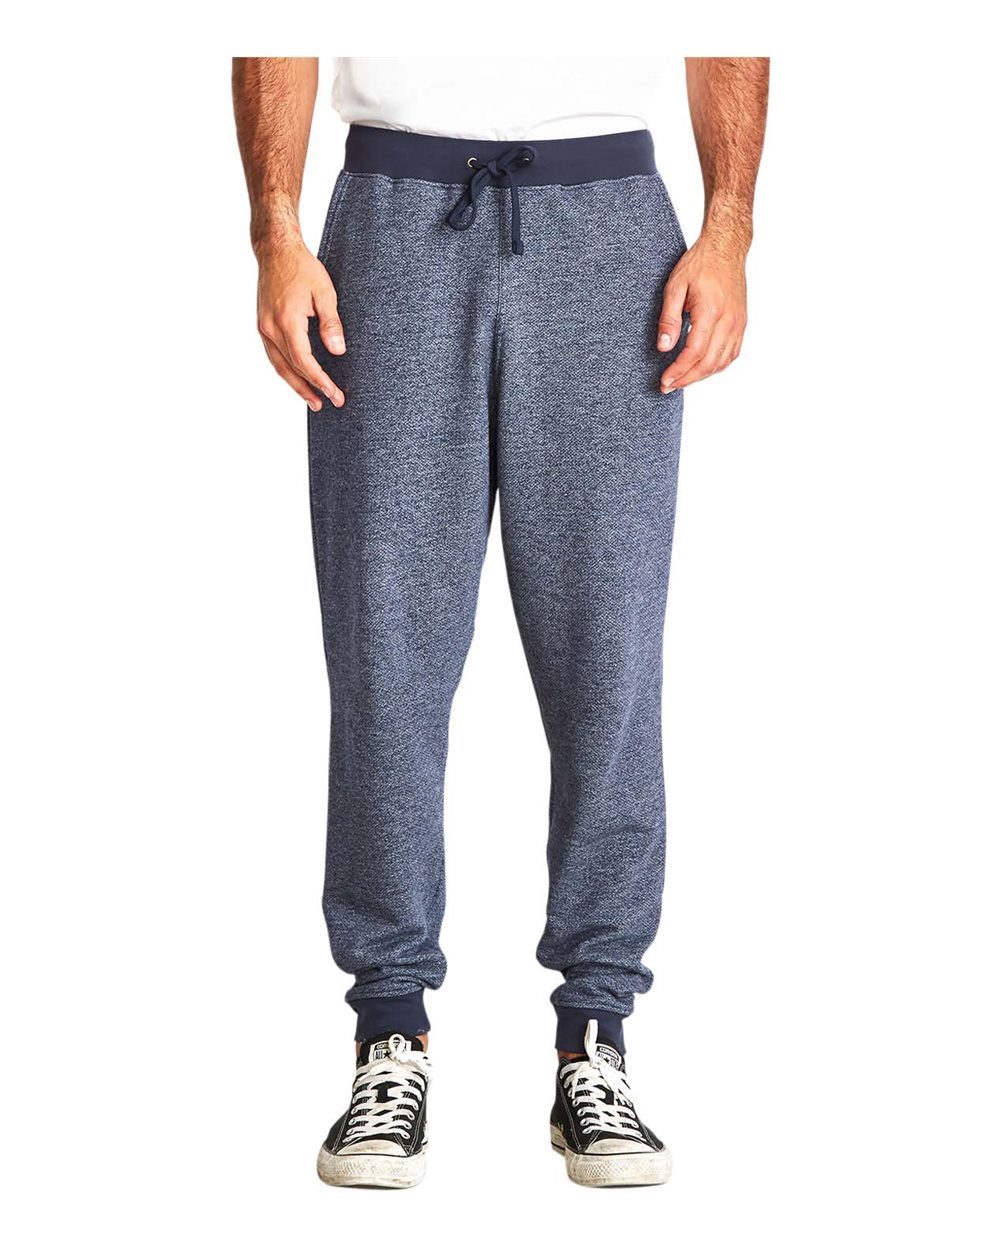 Next Level 9800 - Pacifica Joggers